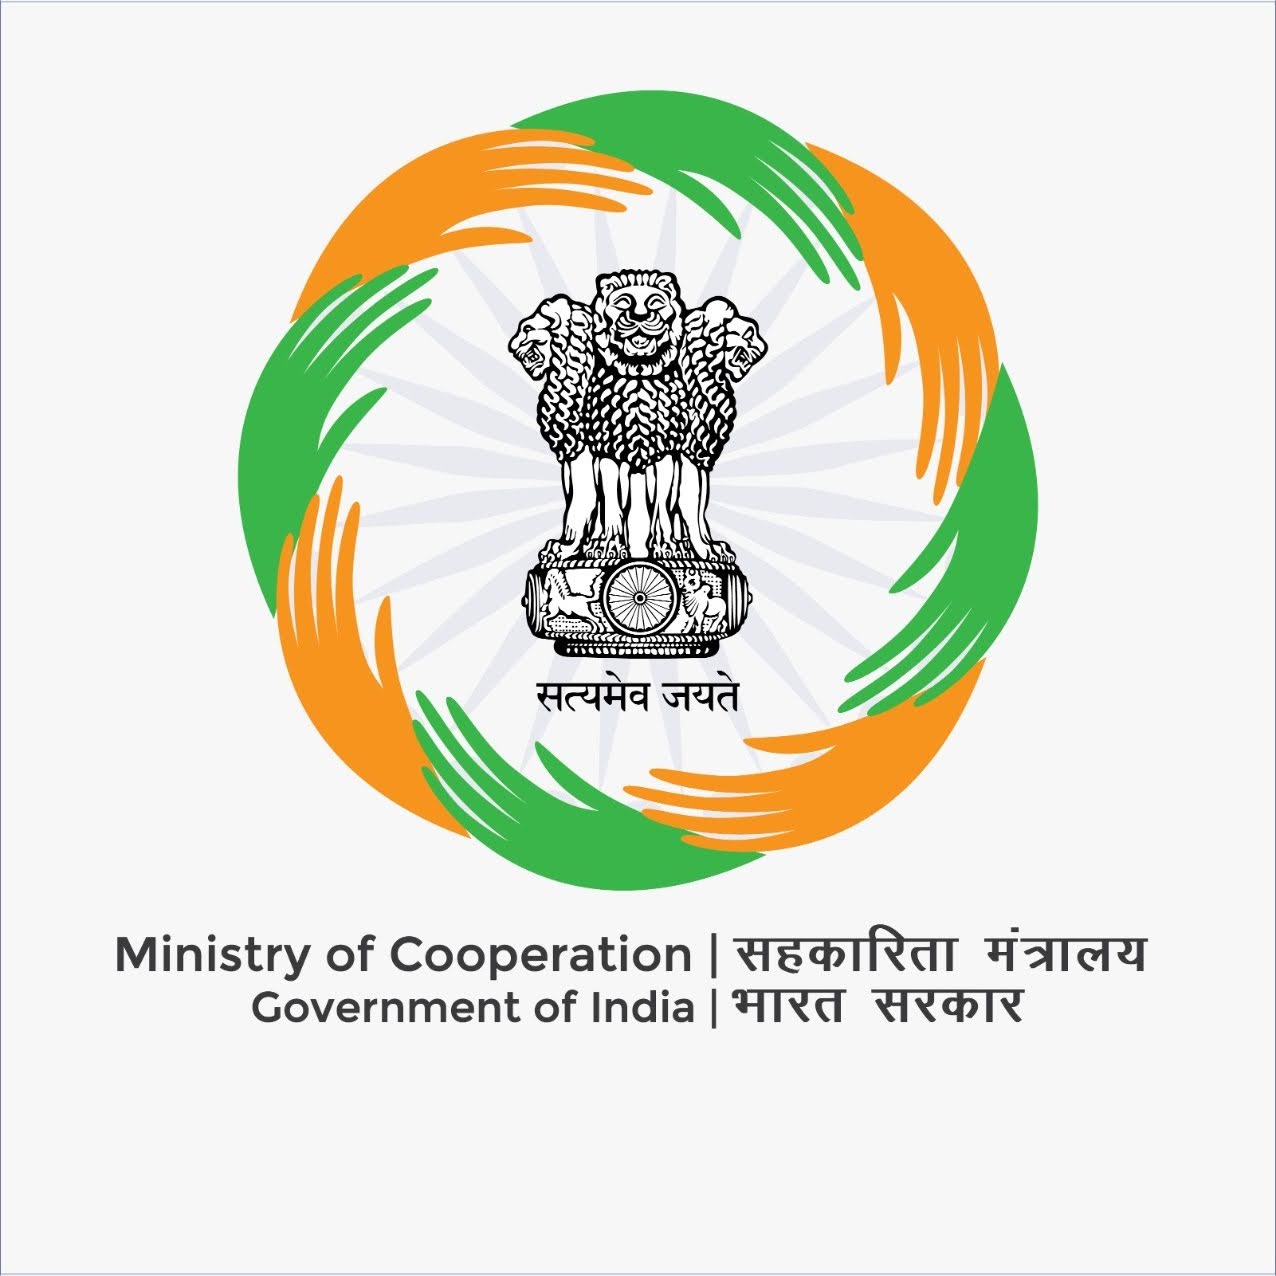 Union Home Minister and Minister of Cooperation Shri Amit Shah will launch computerization project of Agriculture & Rural Development Banks (ARDBs) and Registrar of Cooperative Societies (RCSs) of States/UTs in New Delhi on 30th January, 2024